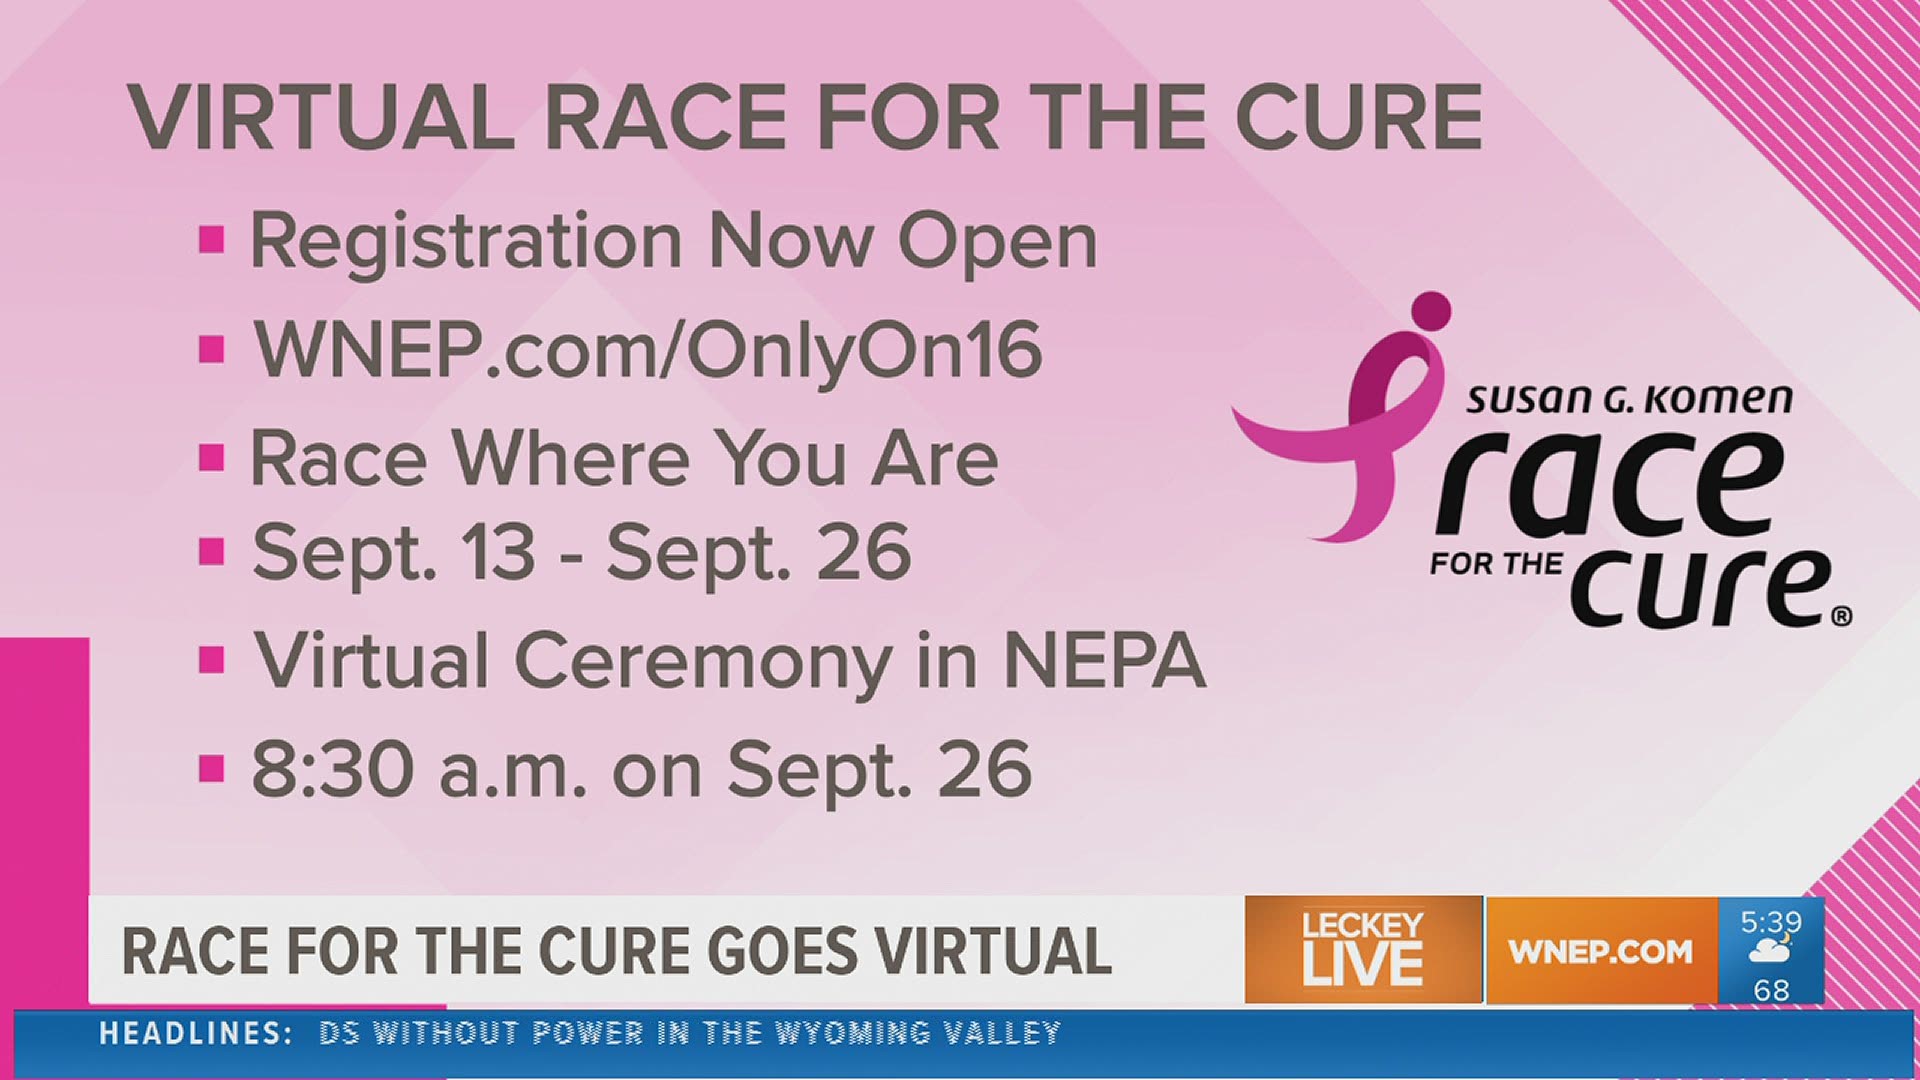 Although Scranton’s in-person “Race For the Cure” may be canceled this year, the mission to end breast cancer is not.